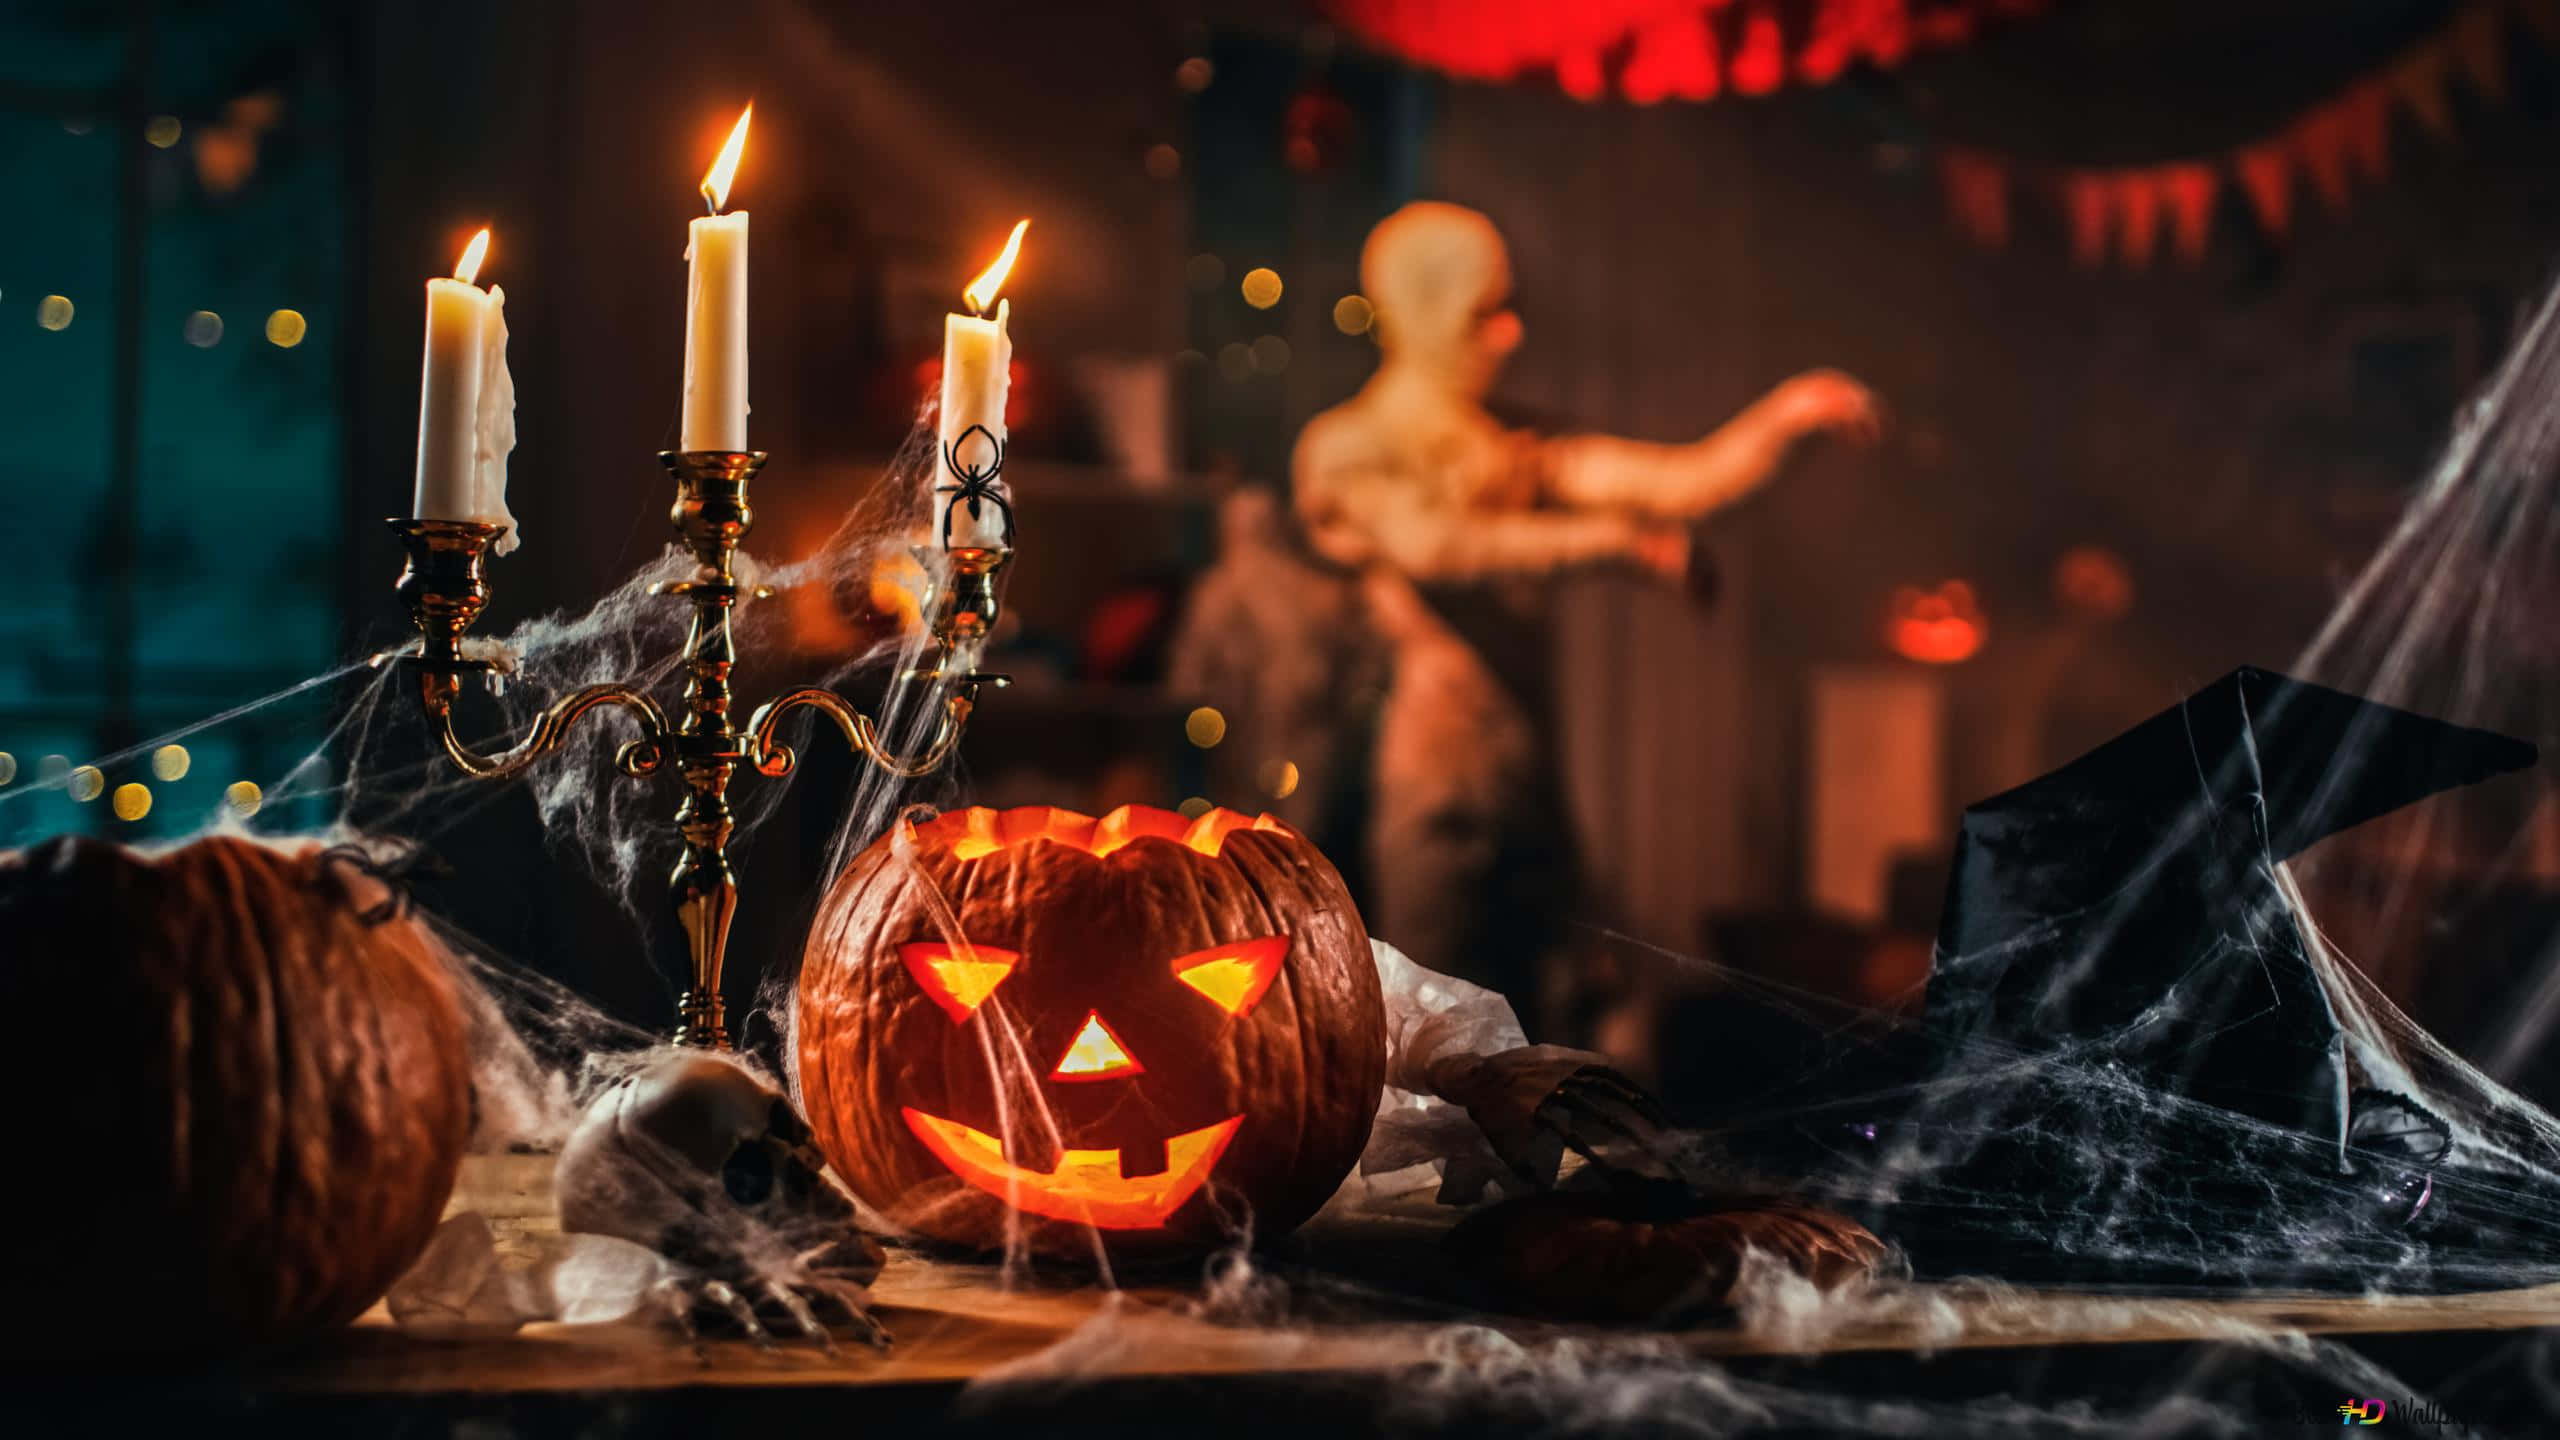 Illuminate your home for Halloween with festive candles Wallpaper